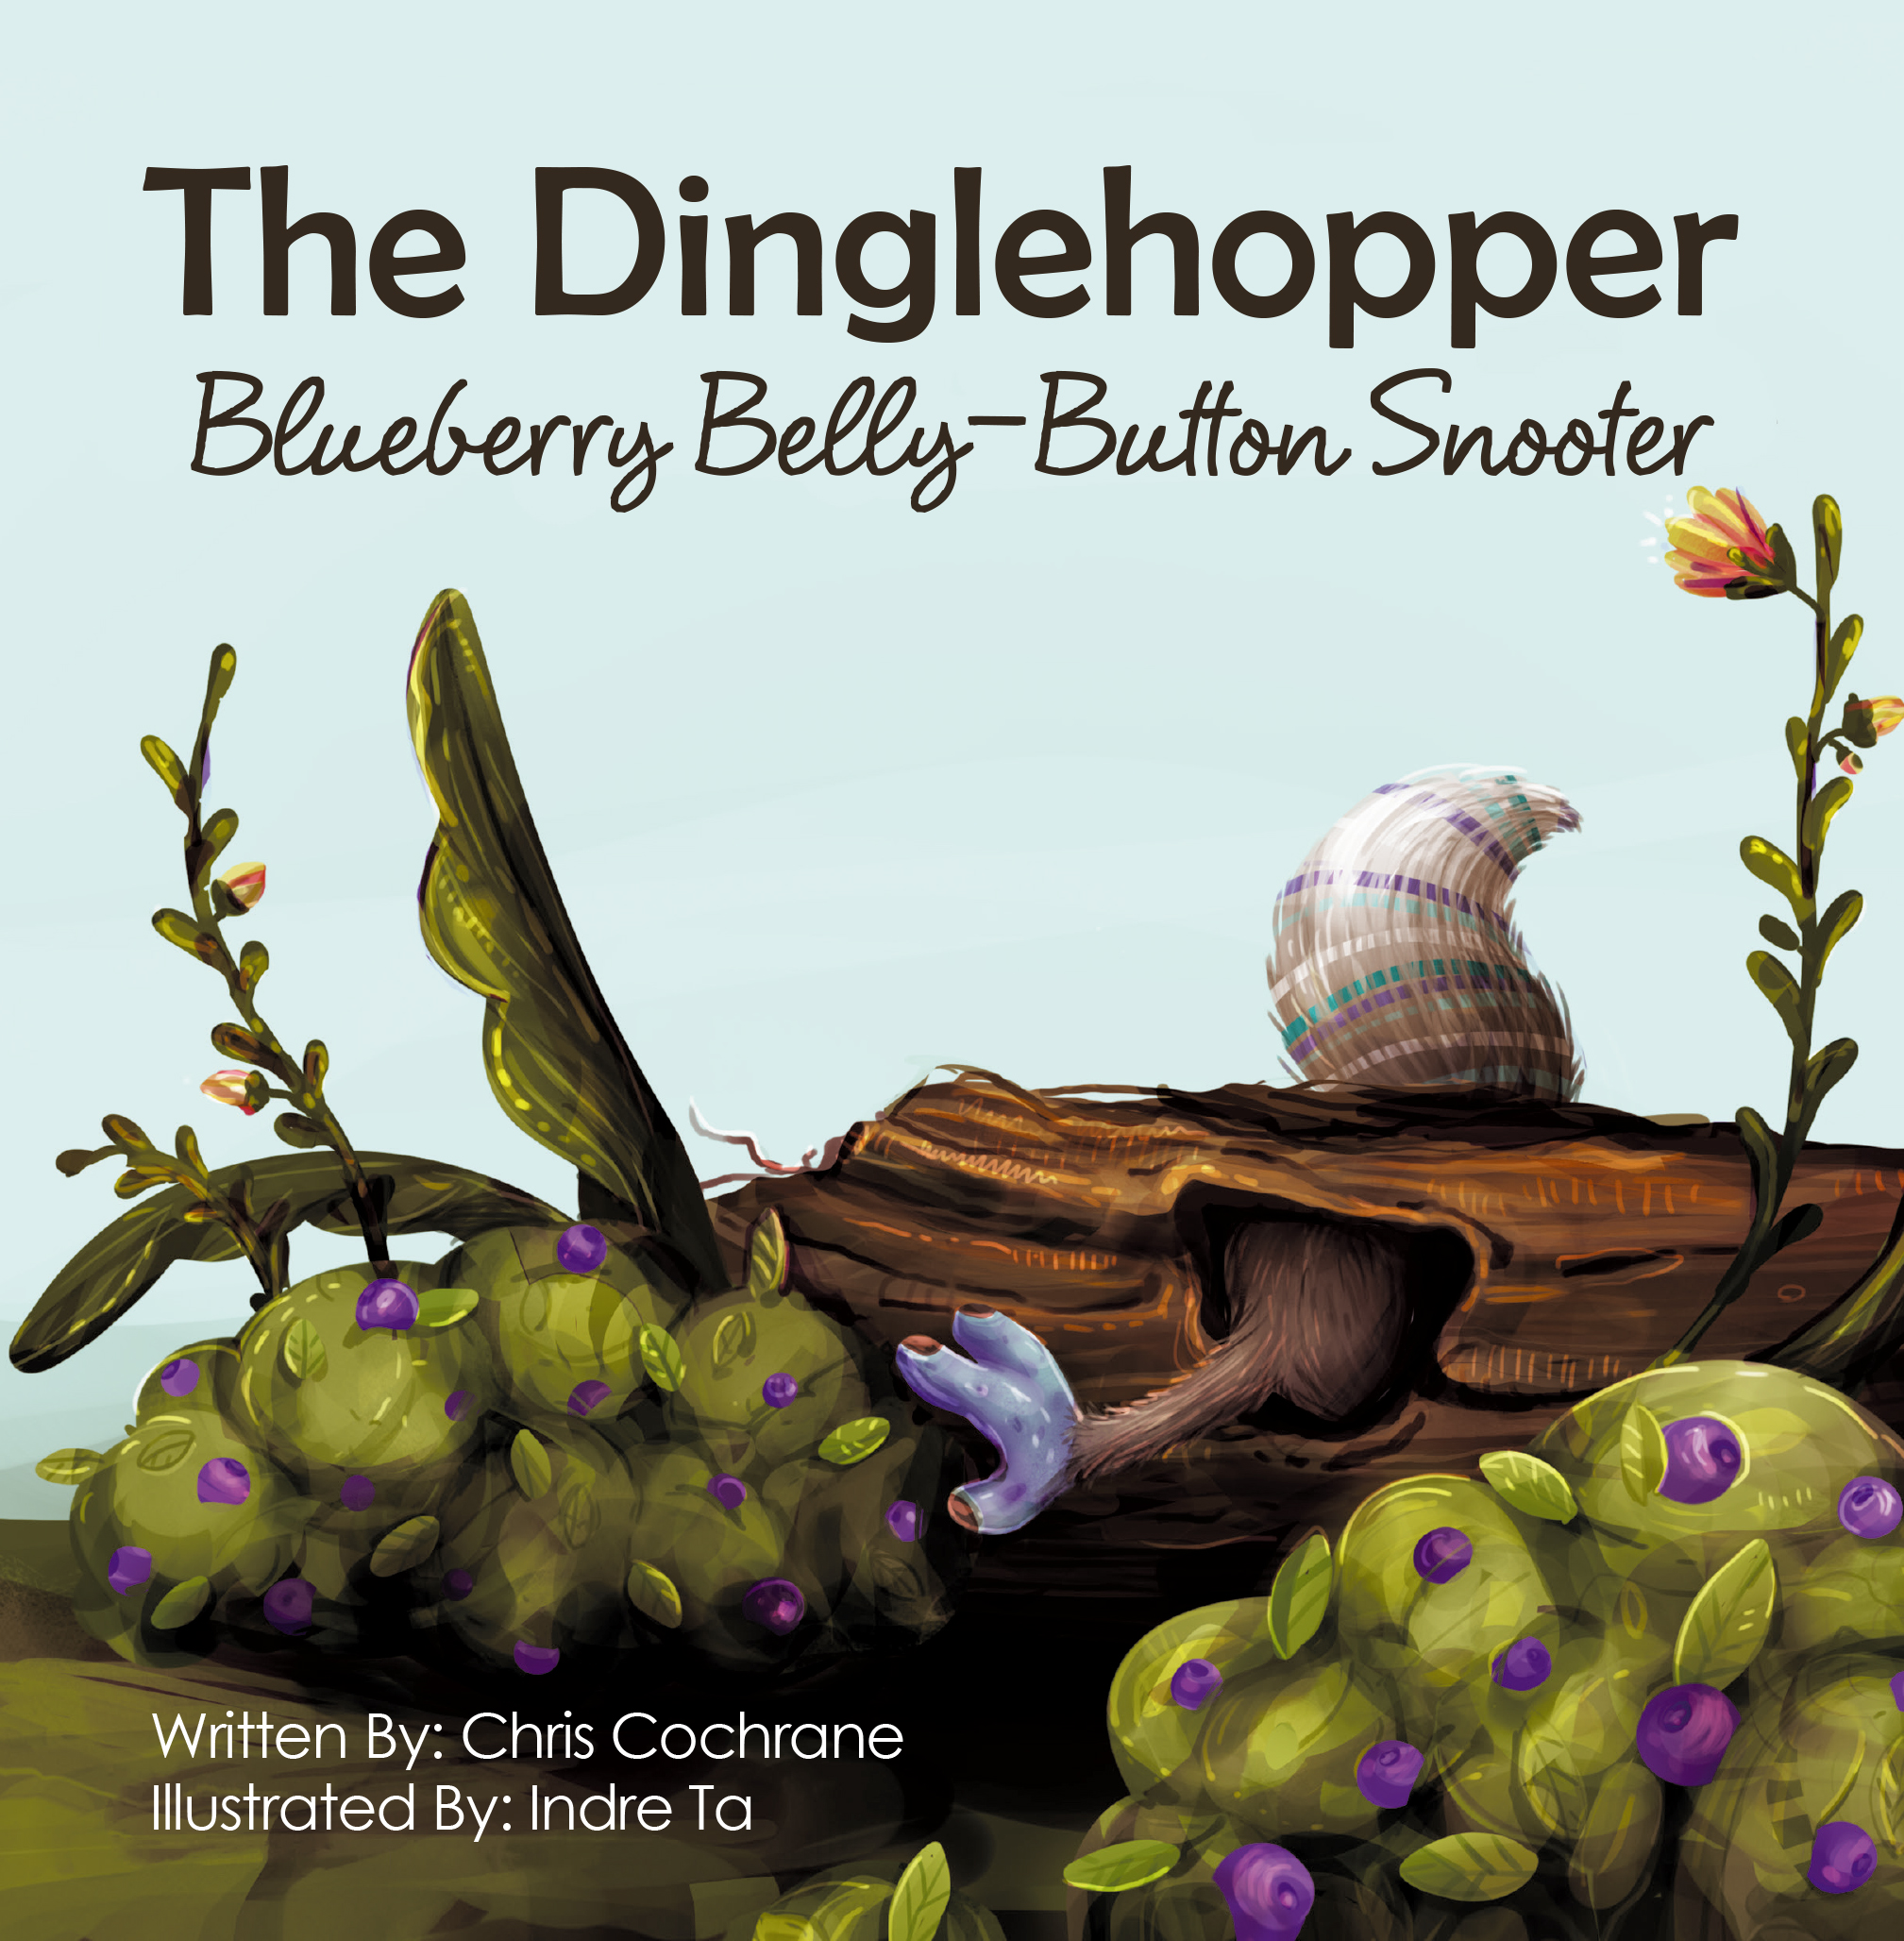 Author Chris Cochrane’s New Book "The Dinglehopper Blueberry Belly-Button Snooter" Follows Two Girls Who Wish to Meet a Creature Who Has Been Doing Their Chores for Them